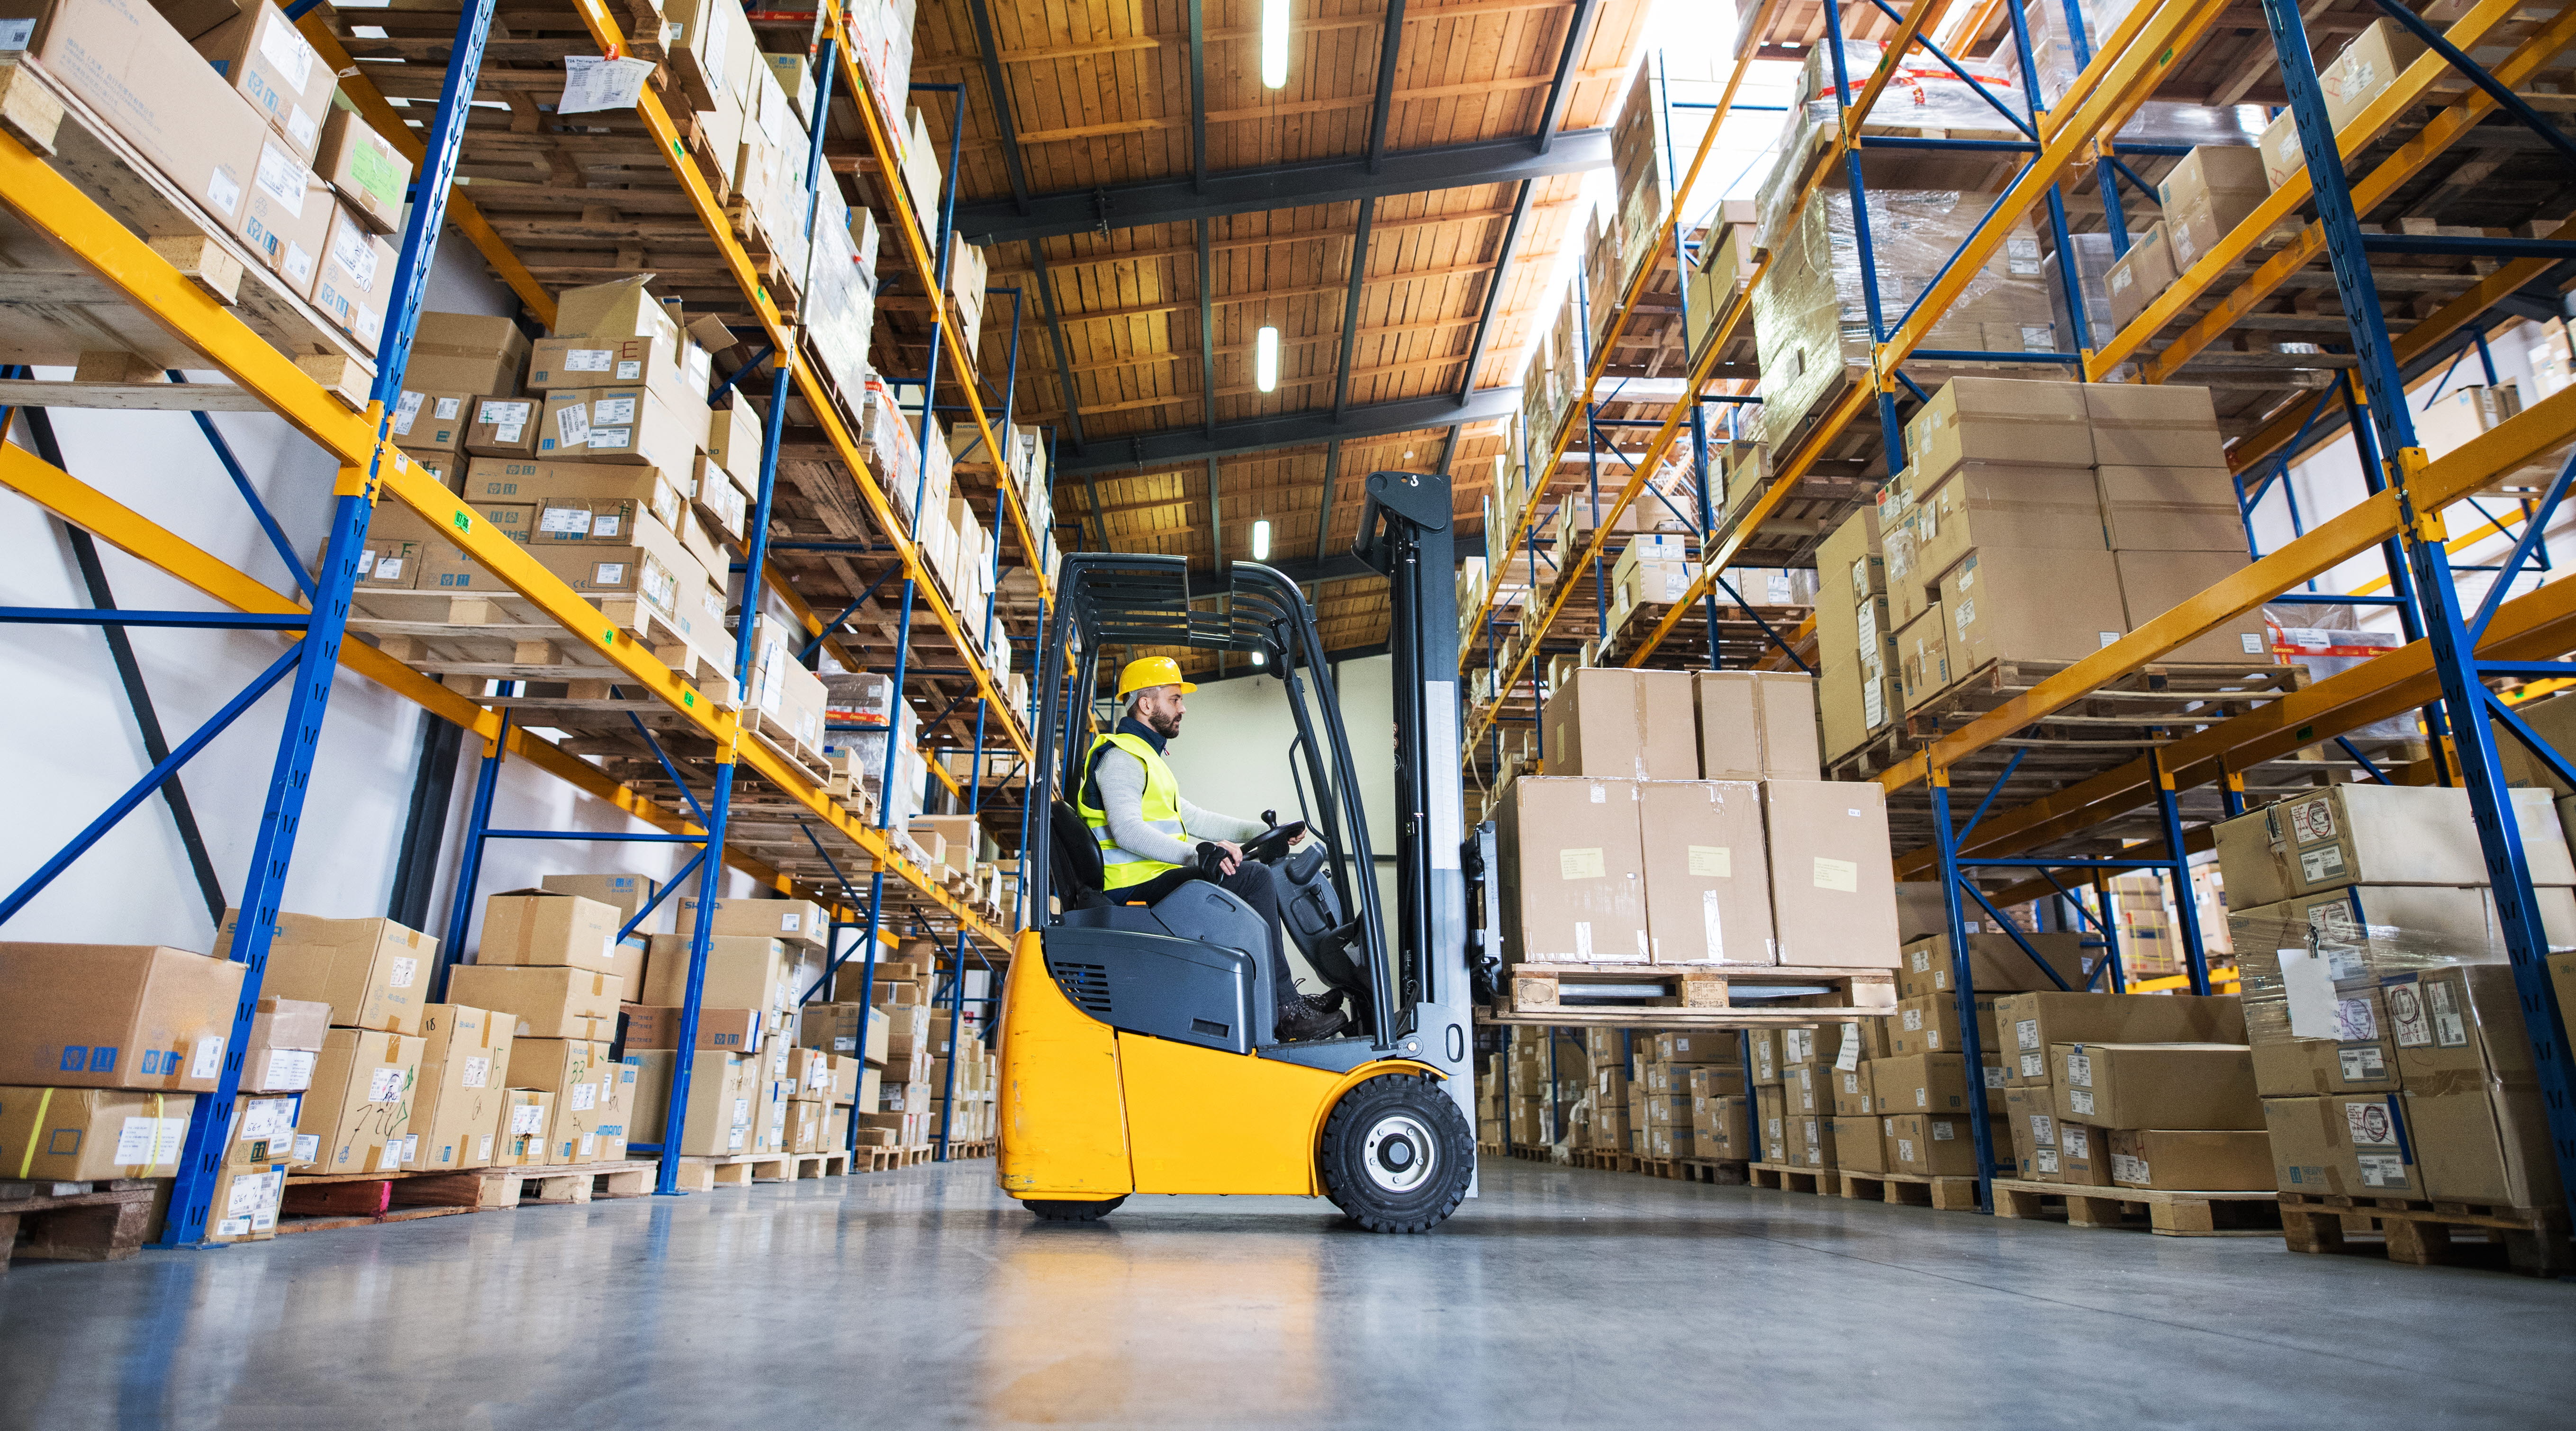 A forklift operator in a warehouse